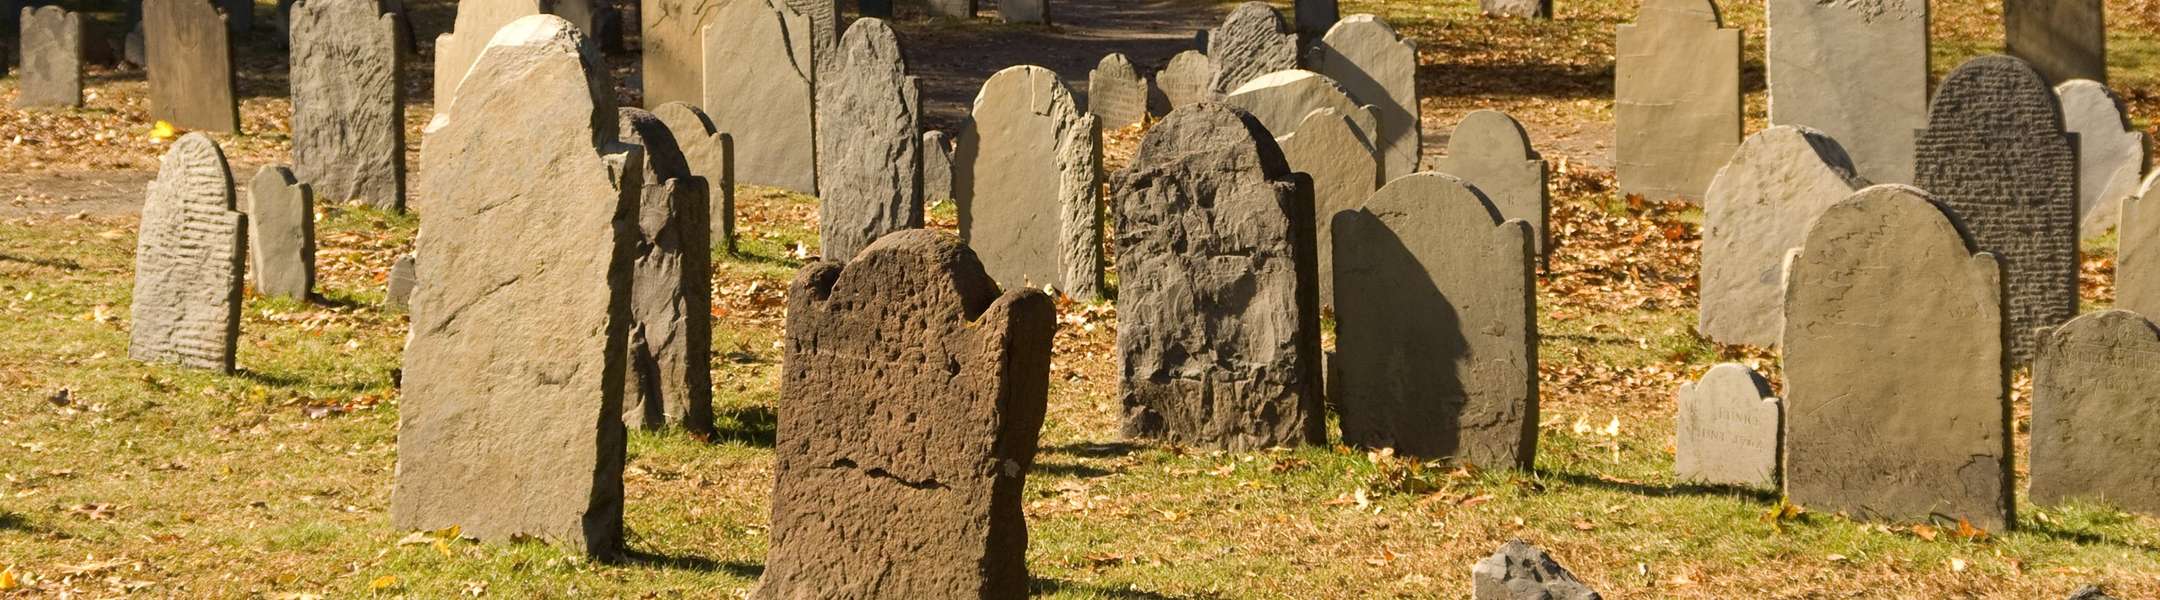 Salem has many haunted Cemeteries - and on the Ghosts of Salem Tour you'll get to see one or more of them.